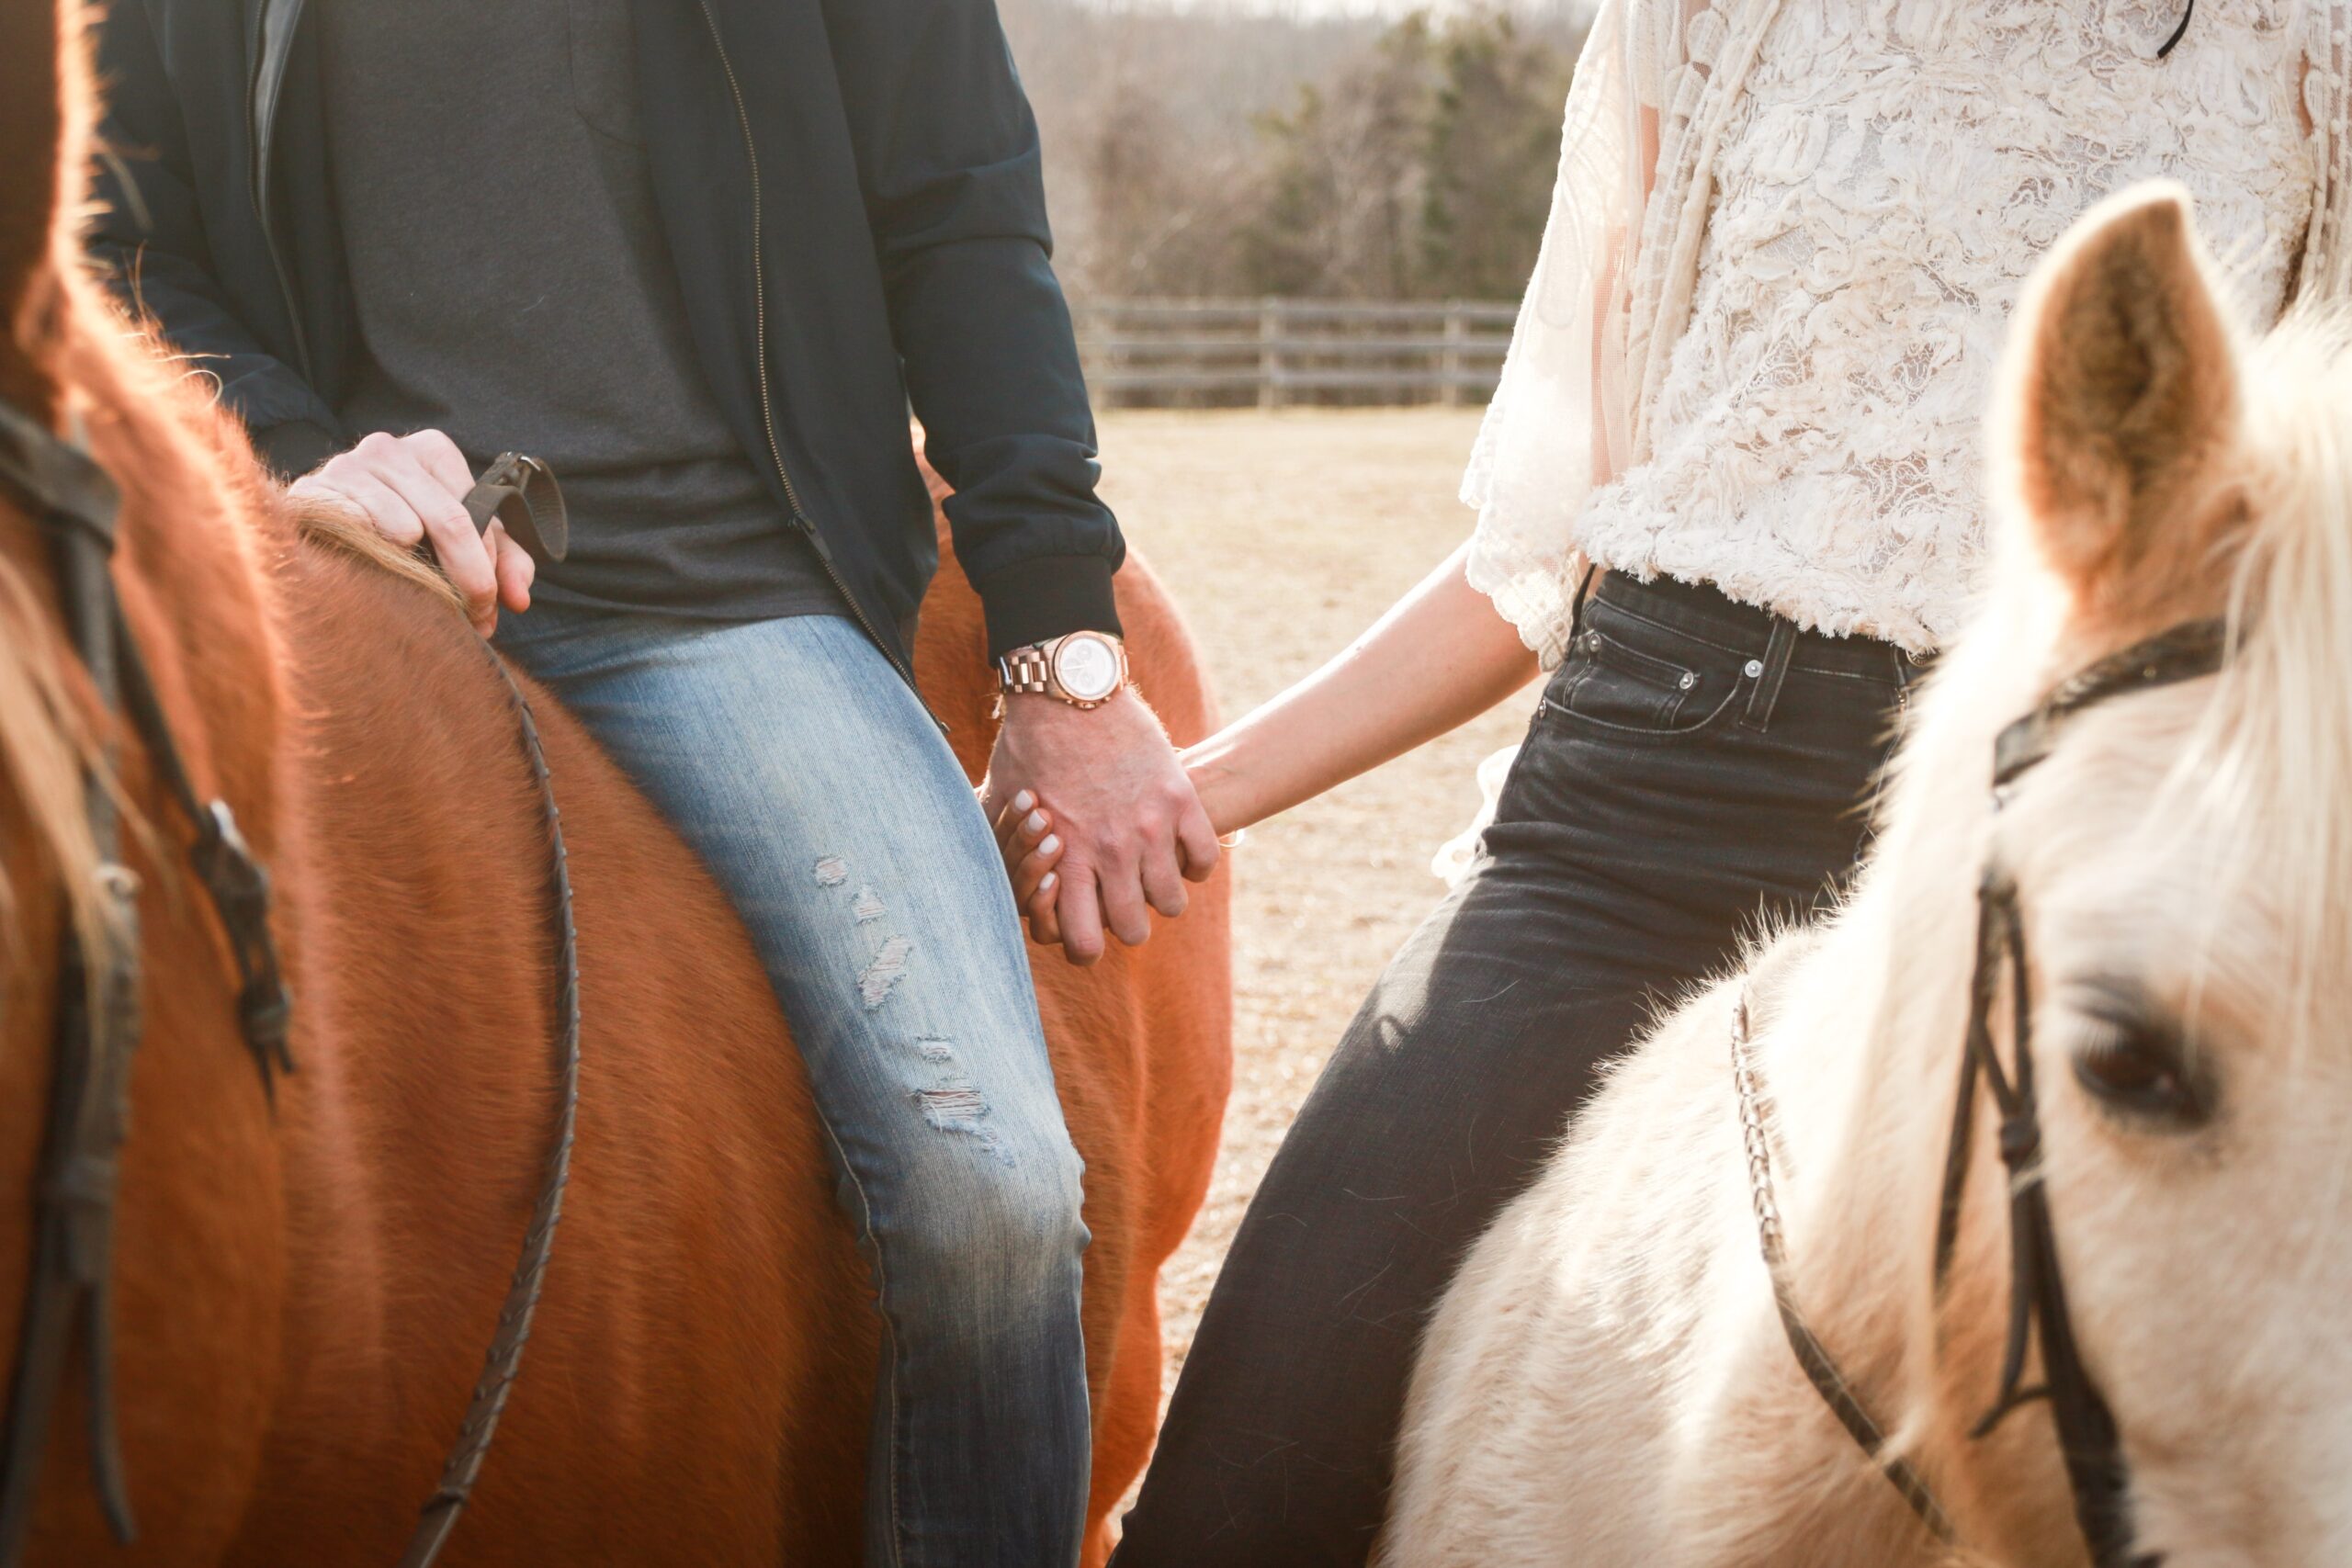 bottom half of couple wearing jeans holding hands while riding horses